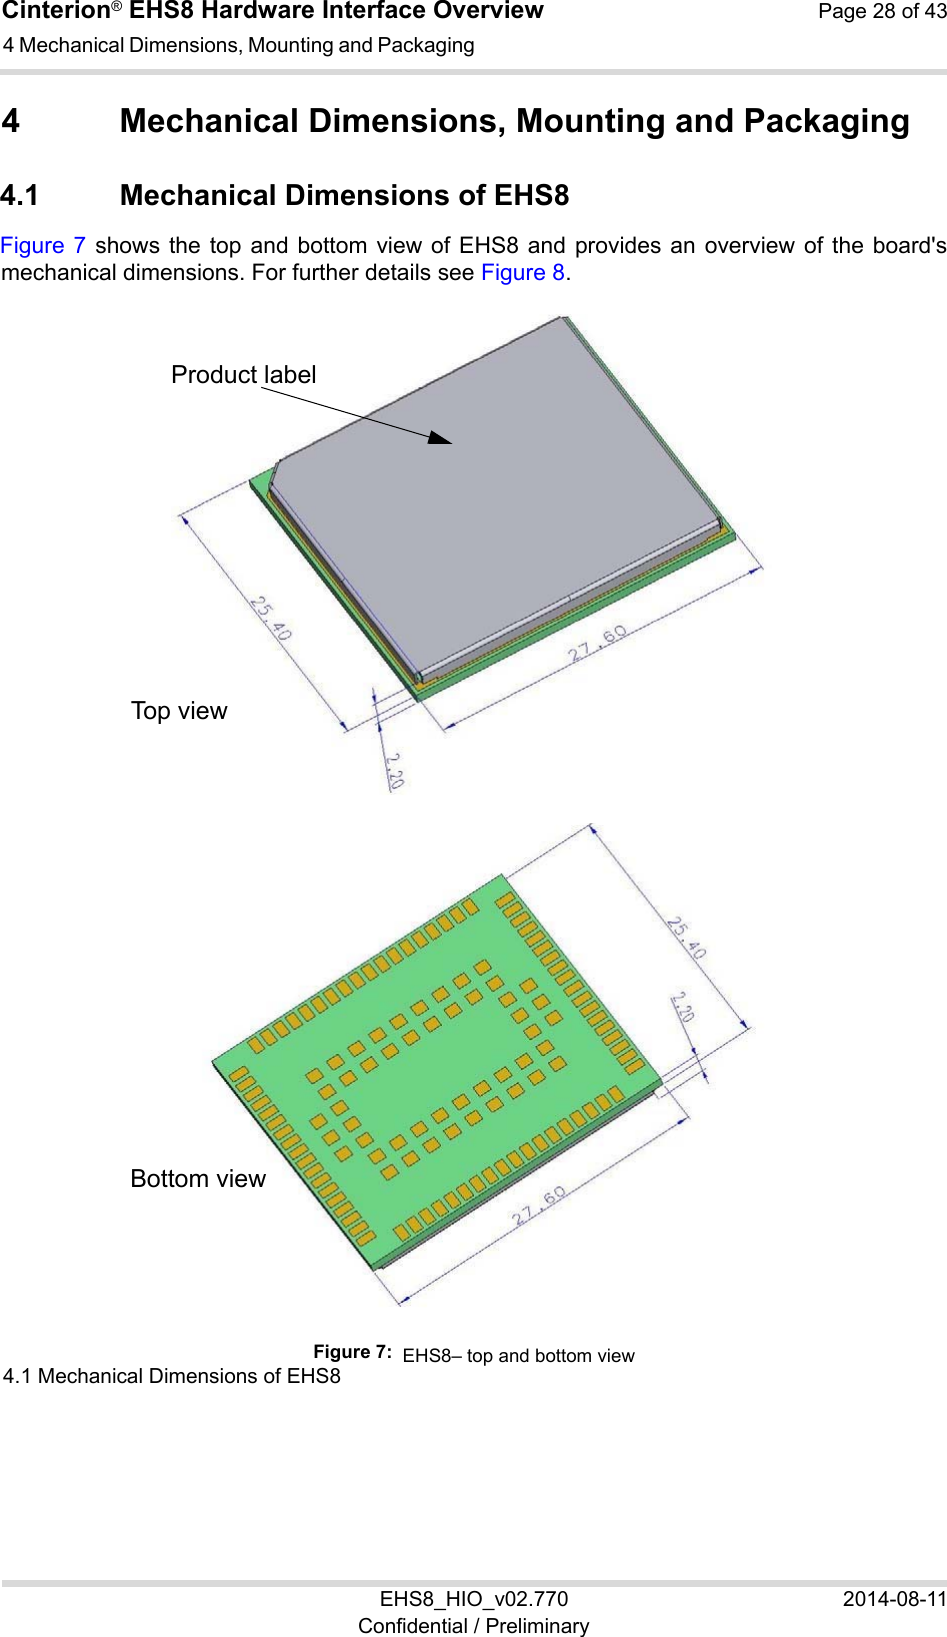 Cinterion® EHS8 Hardware Interface Overview  Page 28 of 43 EHS8_HIO_v02.770  2014-08-11 Confidential / Preliminary 4 Mechanical Dimensions, Mounting and Packaging 28 4  Mechanical Dimensions, Mounting and Packaging 4.1  Mechanical Dimensions of EHS8 Figure 7 shows  the  top and bottom  view  of EHS8  and  provides an overview  of the board&apos;s mechanical dimensions. For further details see Figure 8.   4.1 Mechanical Dimensions of EHS8 Figure 7:  EHS8– top and bottom viewProduct label Top view Bottom view 